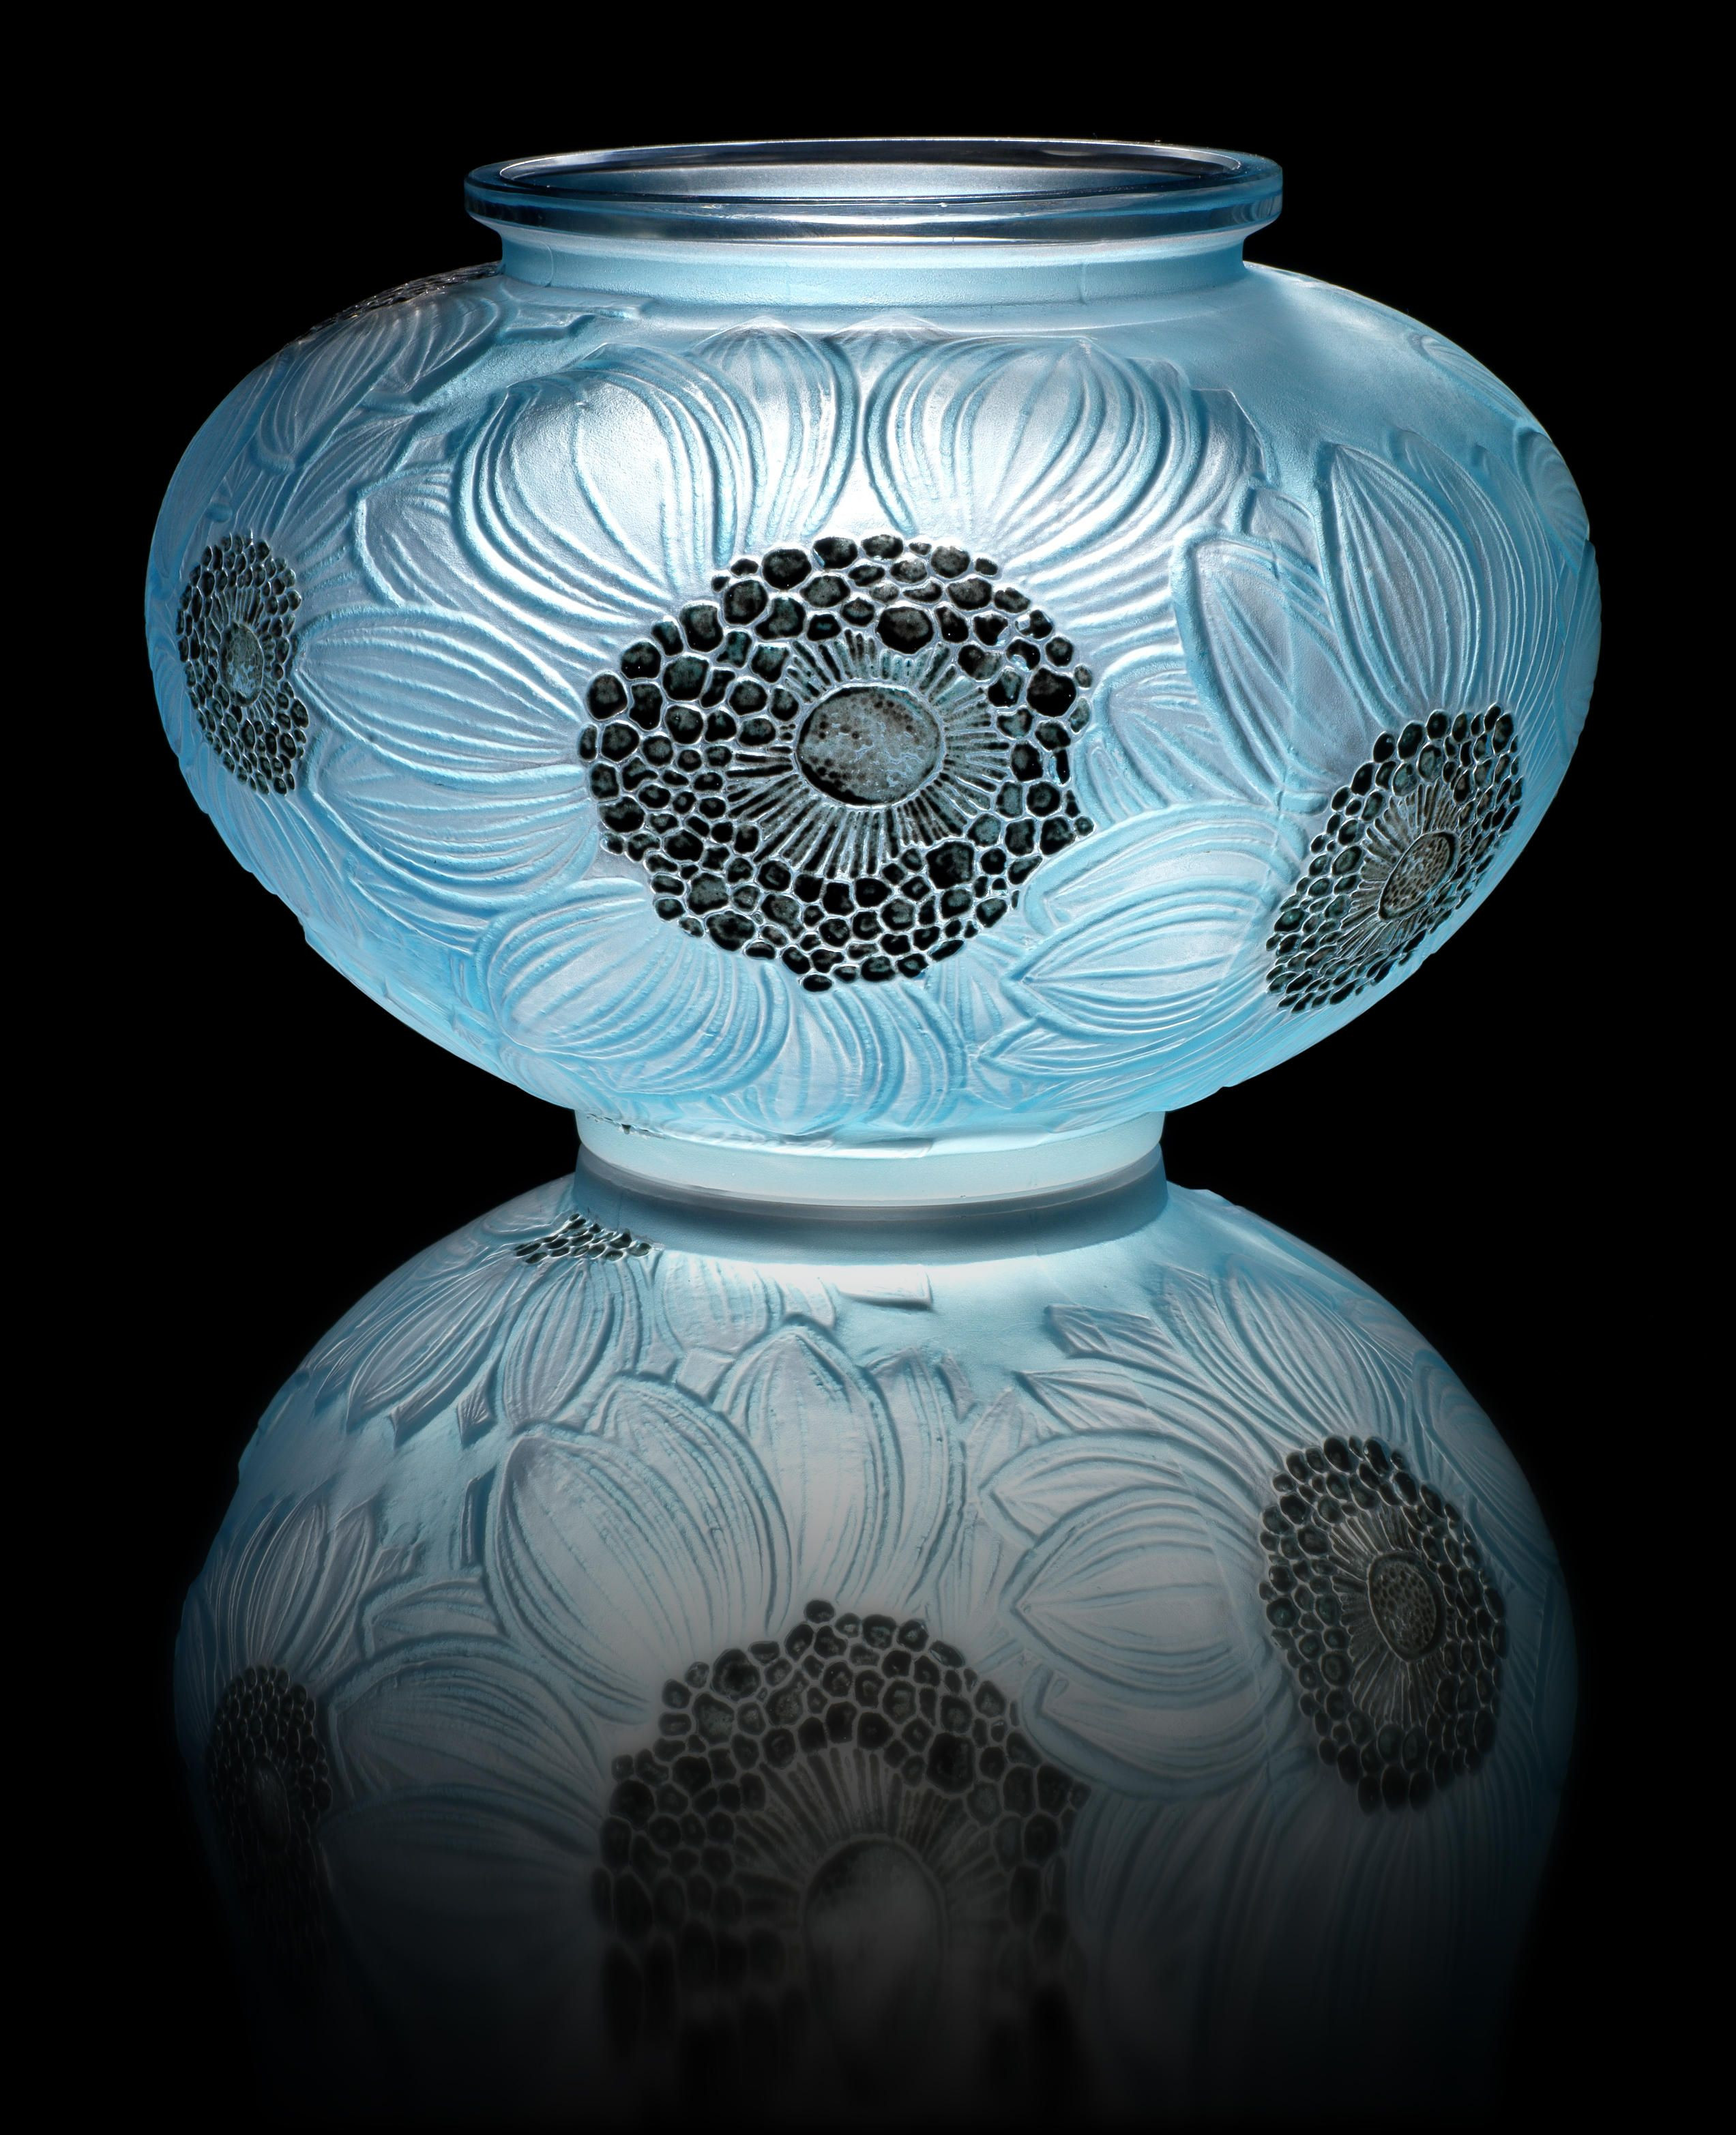 lalique bacchantes vase large of rena lalique dahlias a vase design 1923 frosted glass heightened within rena lalique dahlias a vase design 1923 frosted glass heightened with blue staining and black enamel 12 4cm high